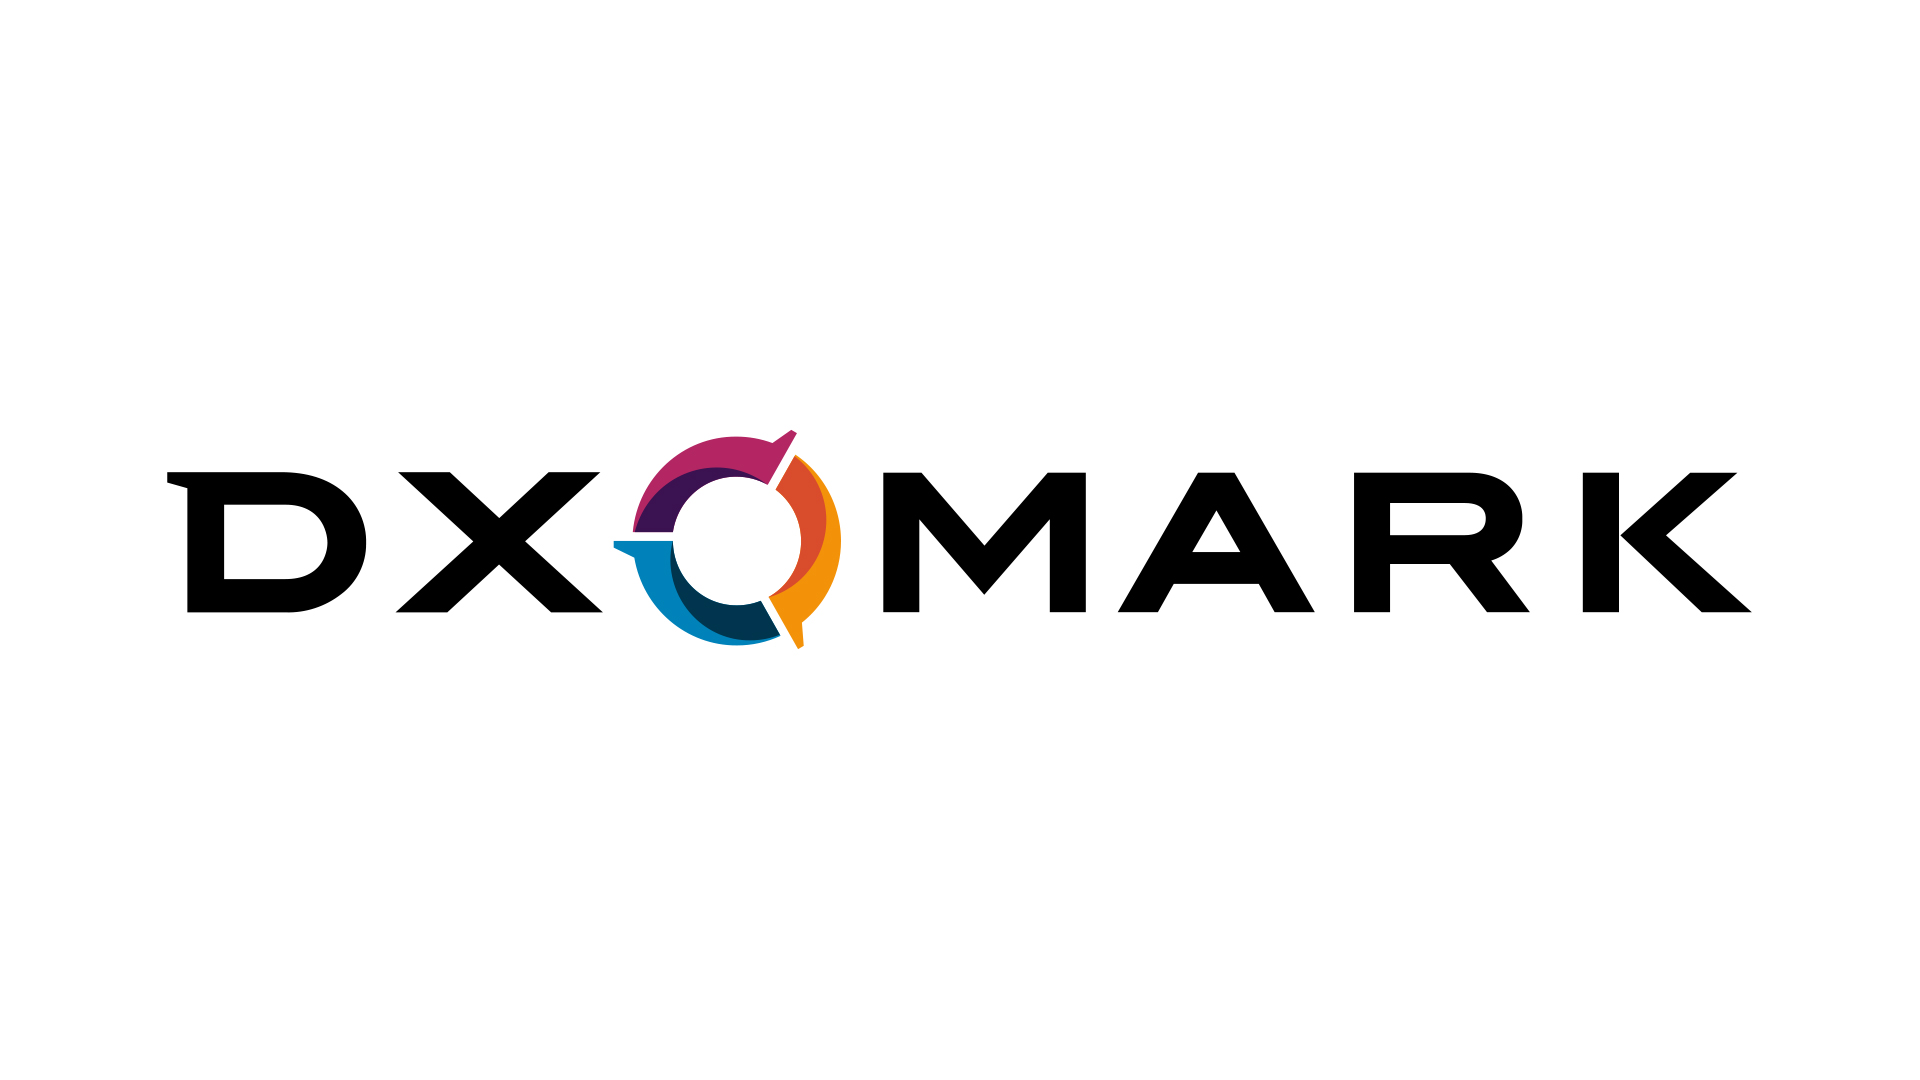 DXOMARK 官方网站- The Reference for Image Quality